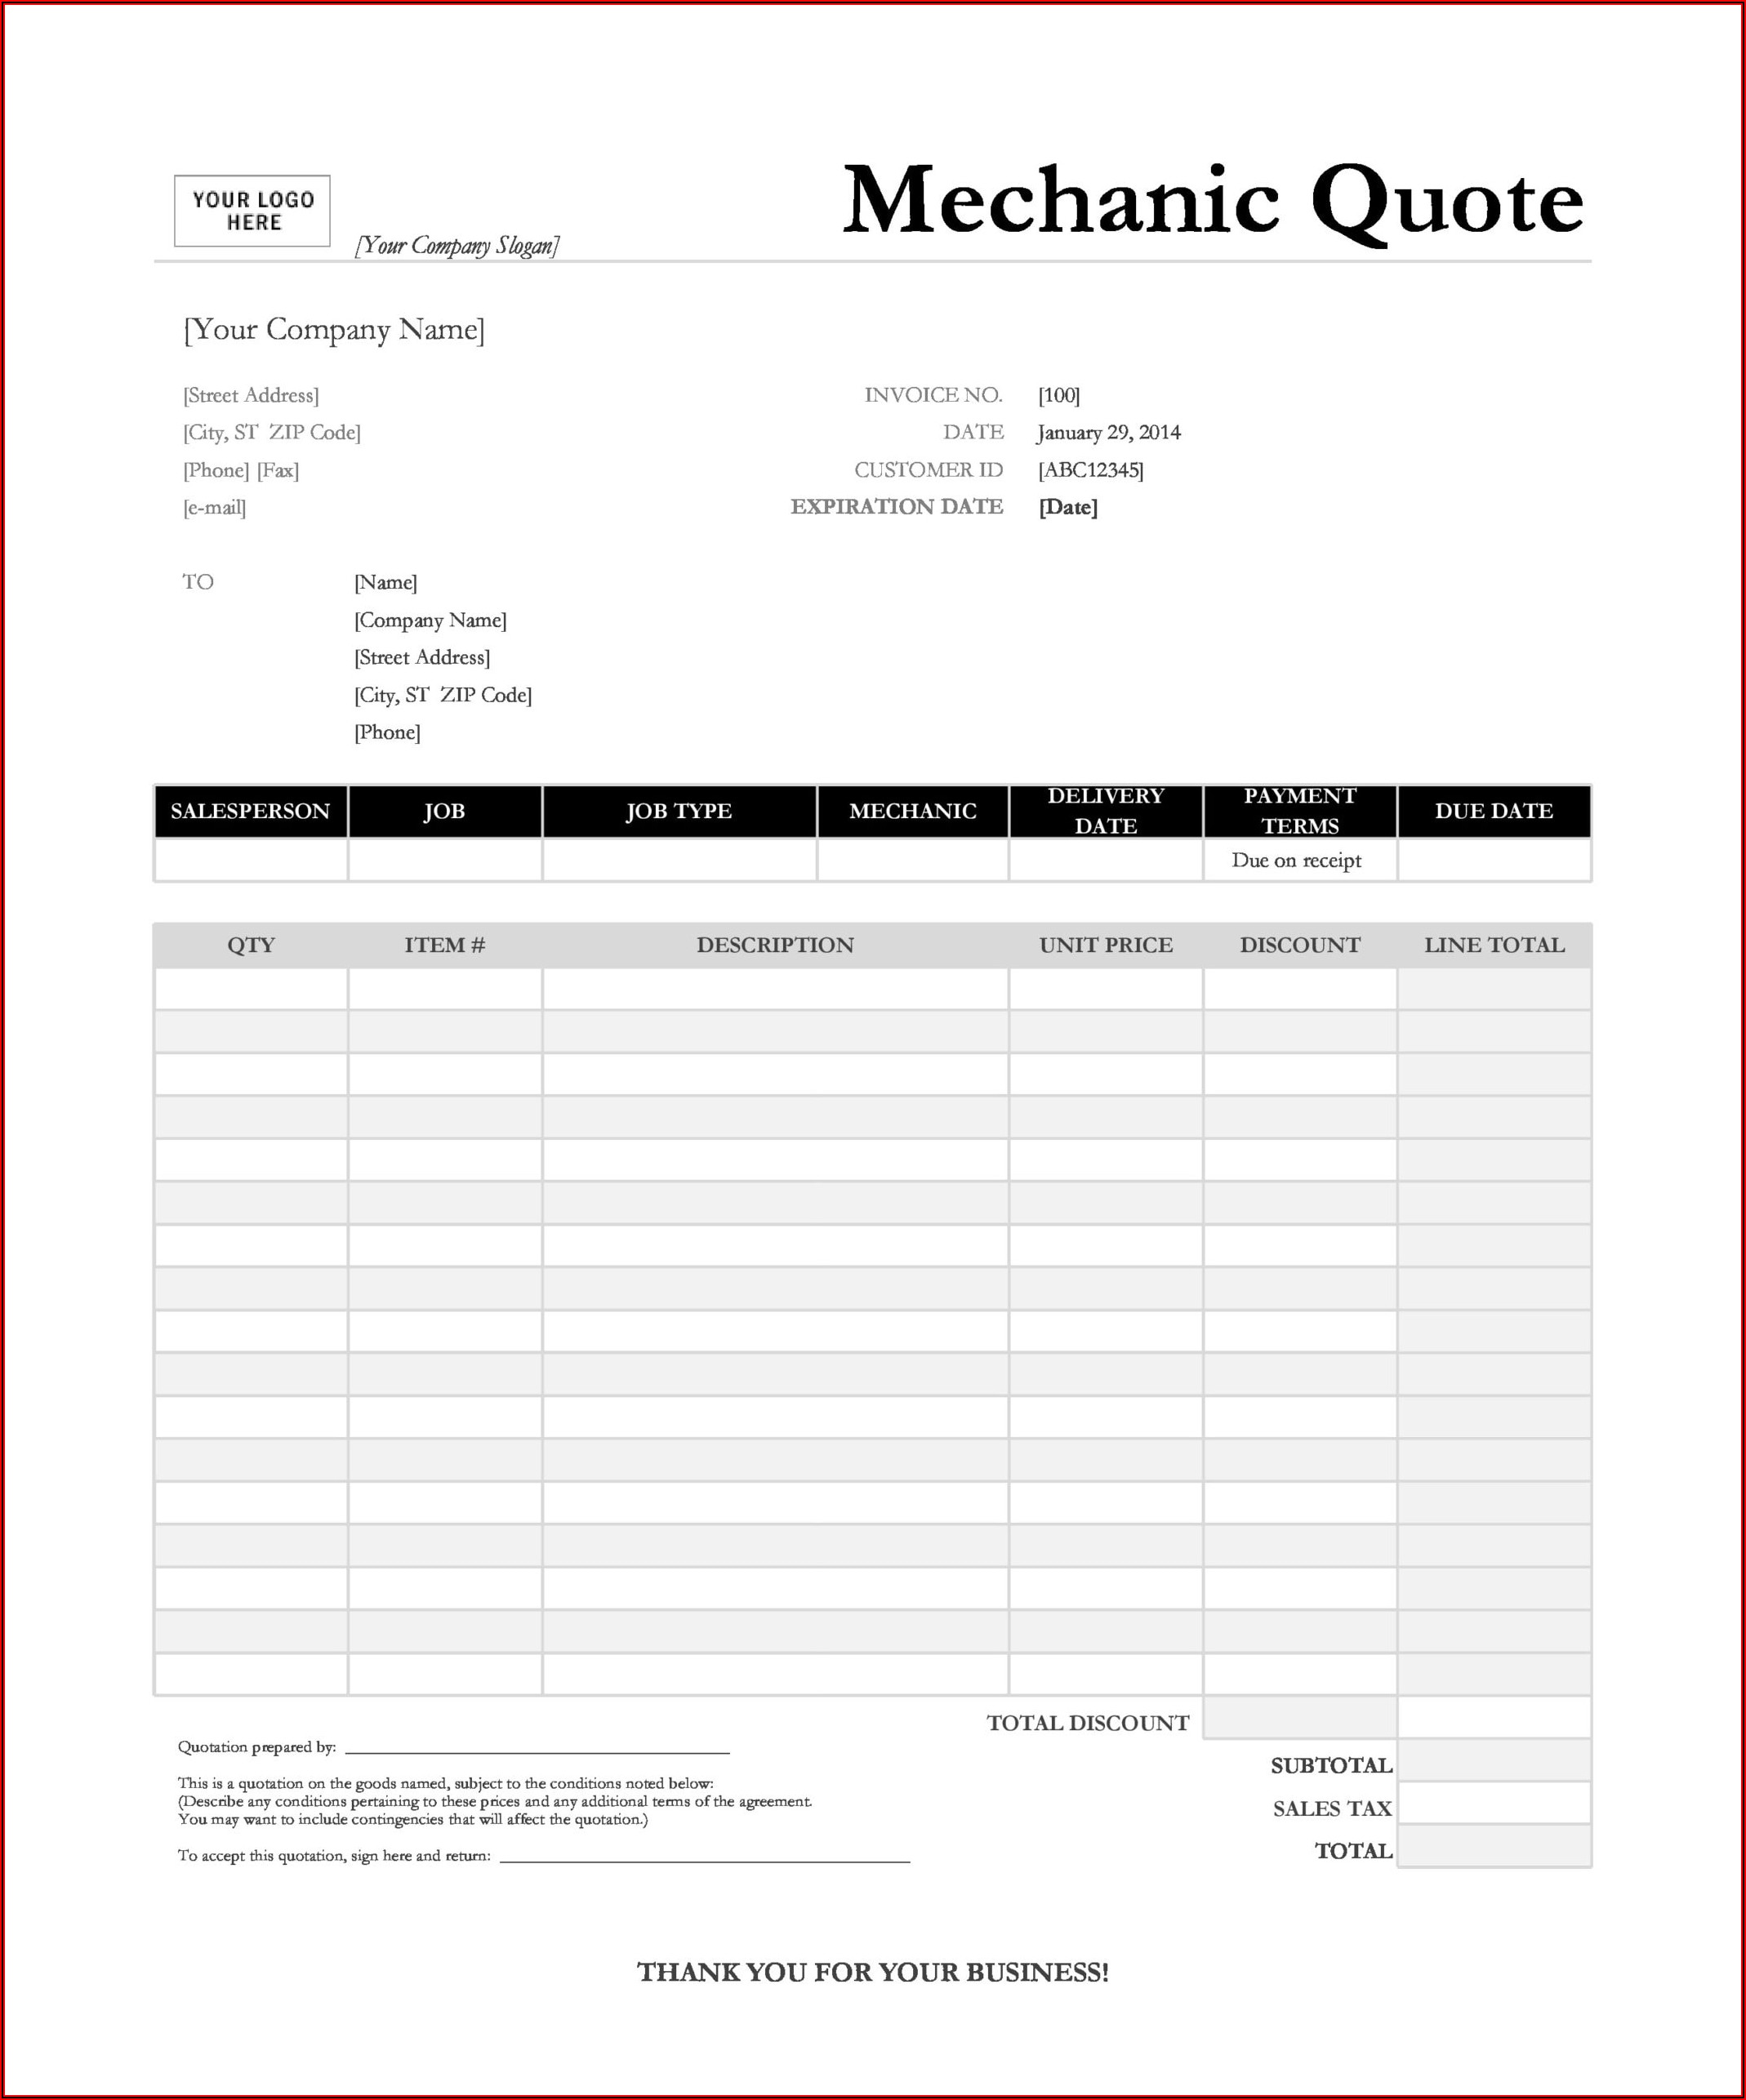 Blank Downloadable Free Printable Auto Repair Invoice Template